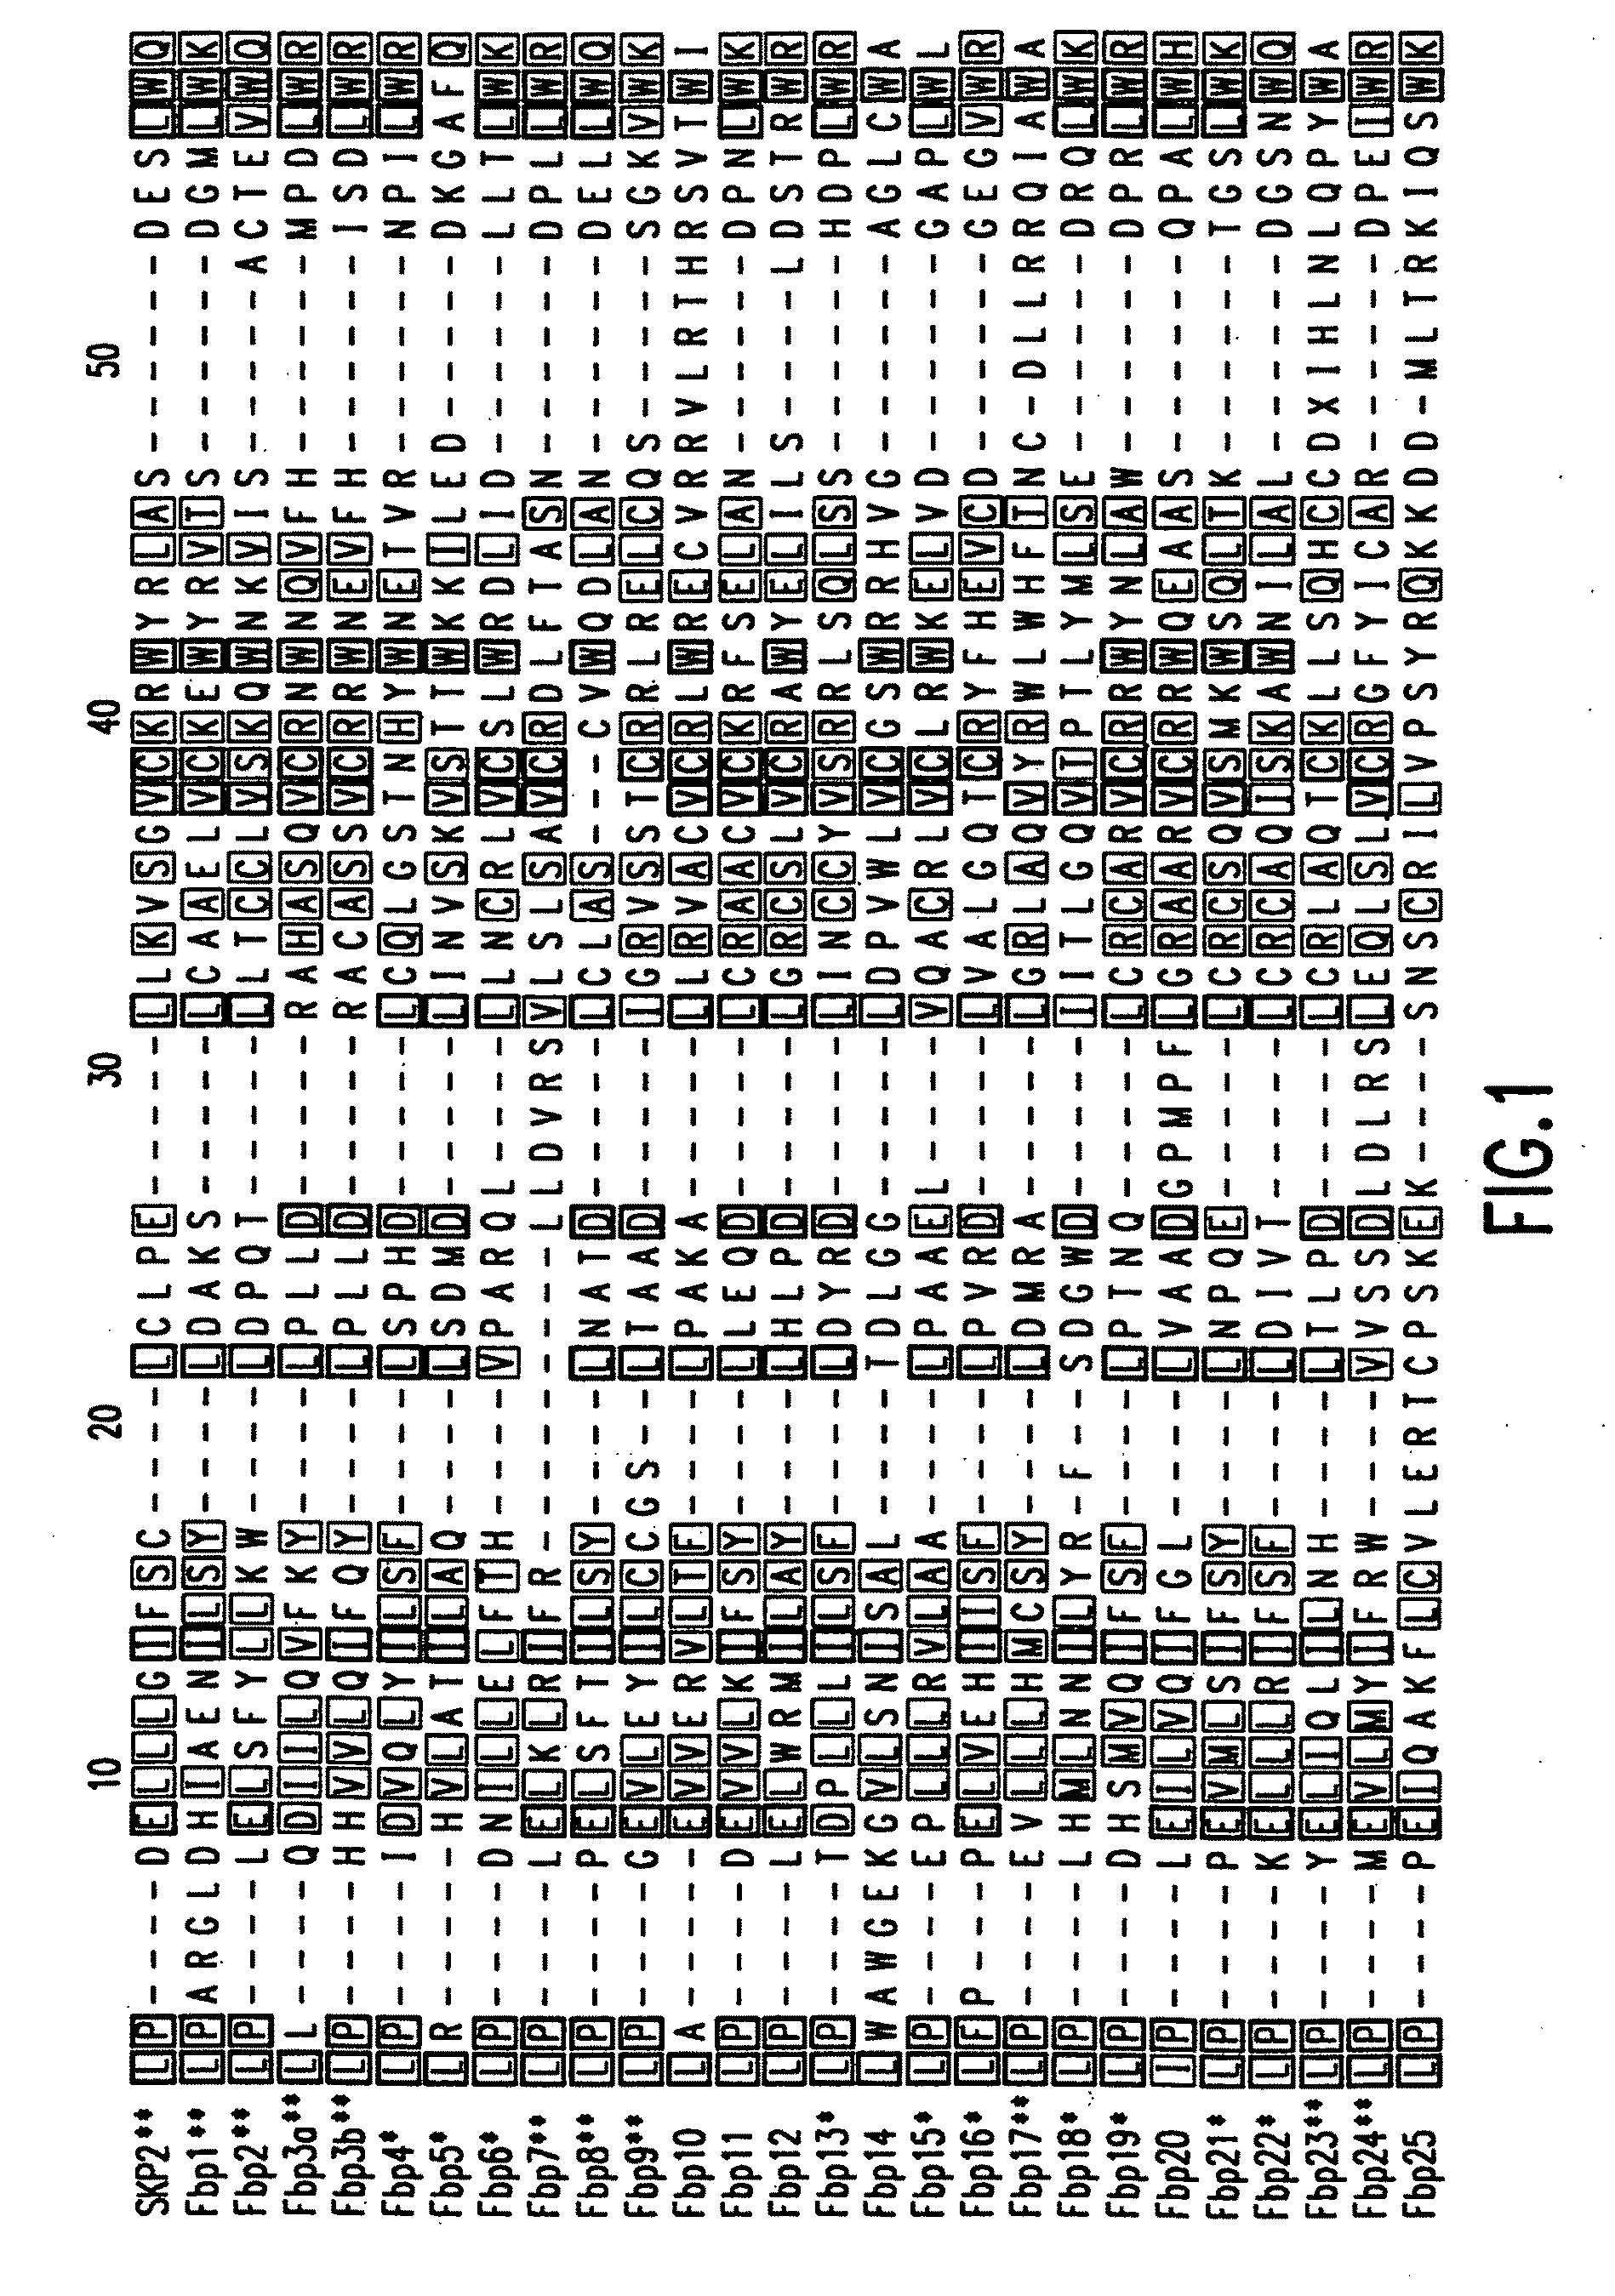 Methods to identify compounds useful for the treatment of proliferative and differentiative disorders